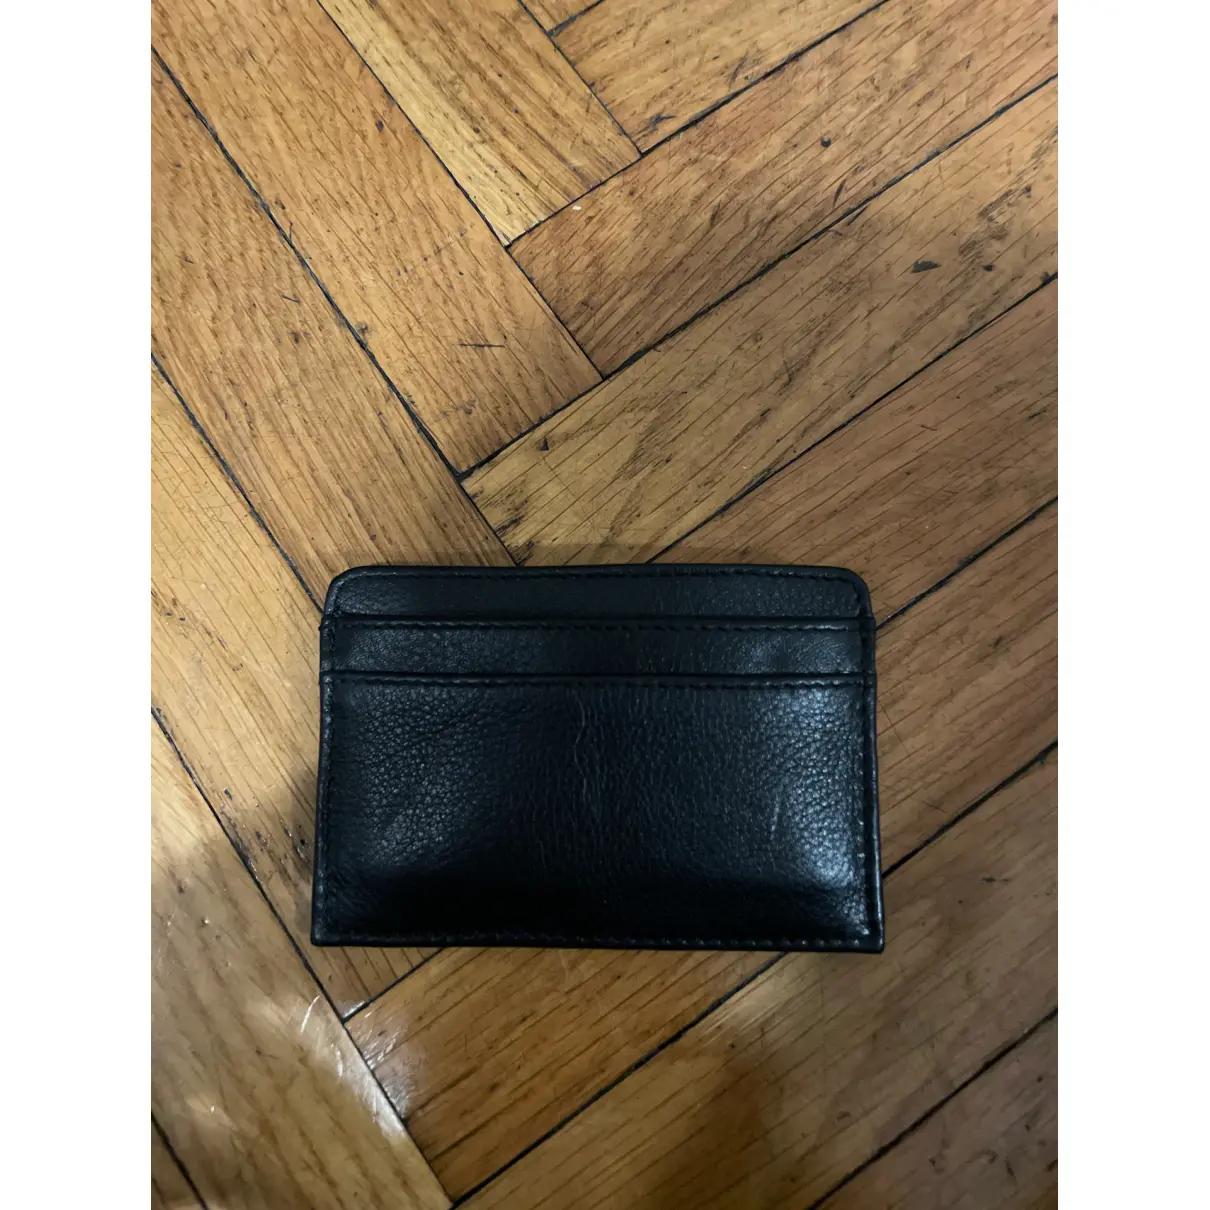 Buy Zadig & Voltaire Leather purse online